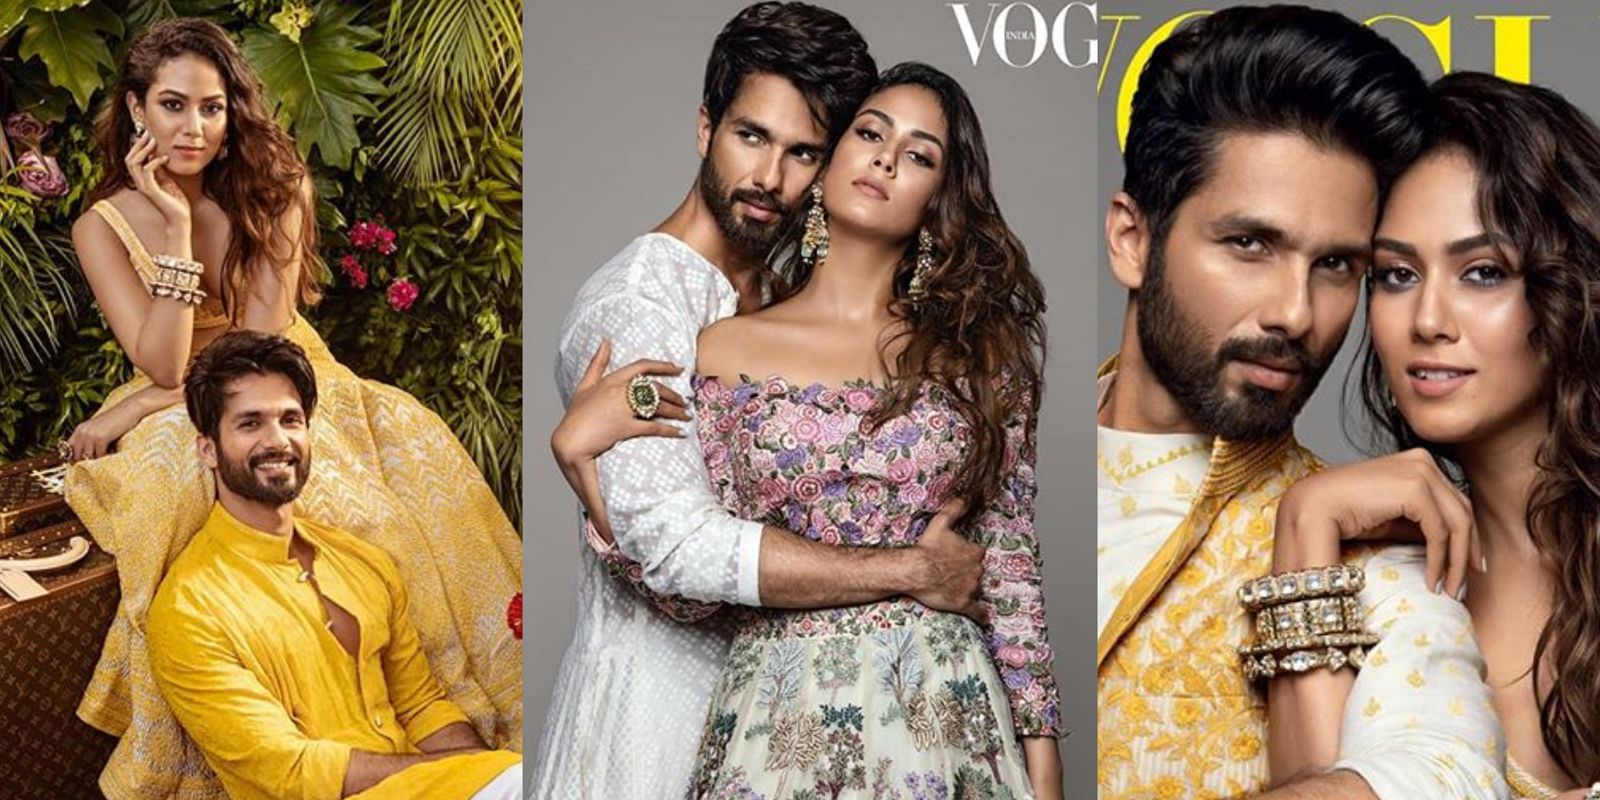 Shahid Kapoor Sizzles A Magazine Photoshoot With Wife Mira Rajput! See Pics...